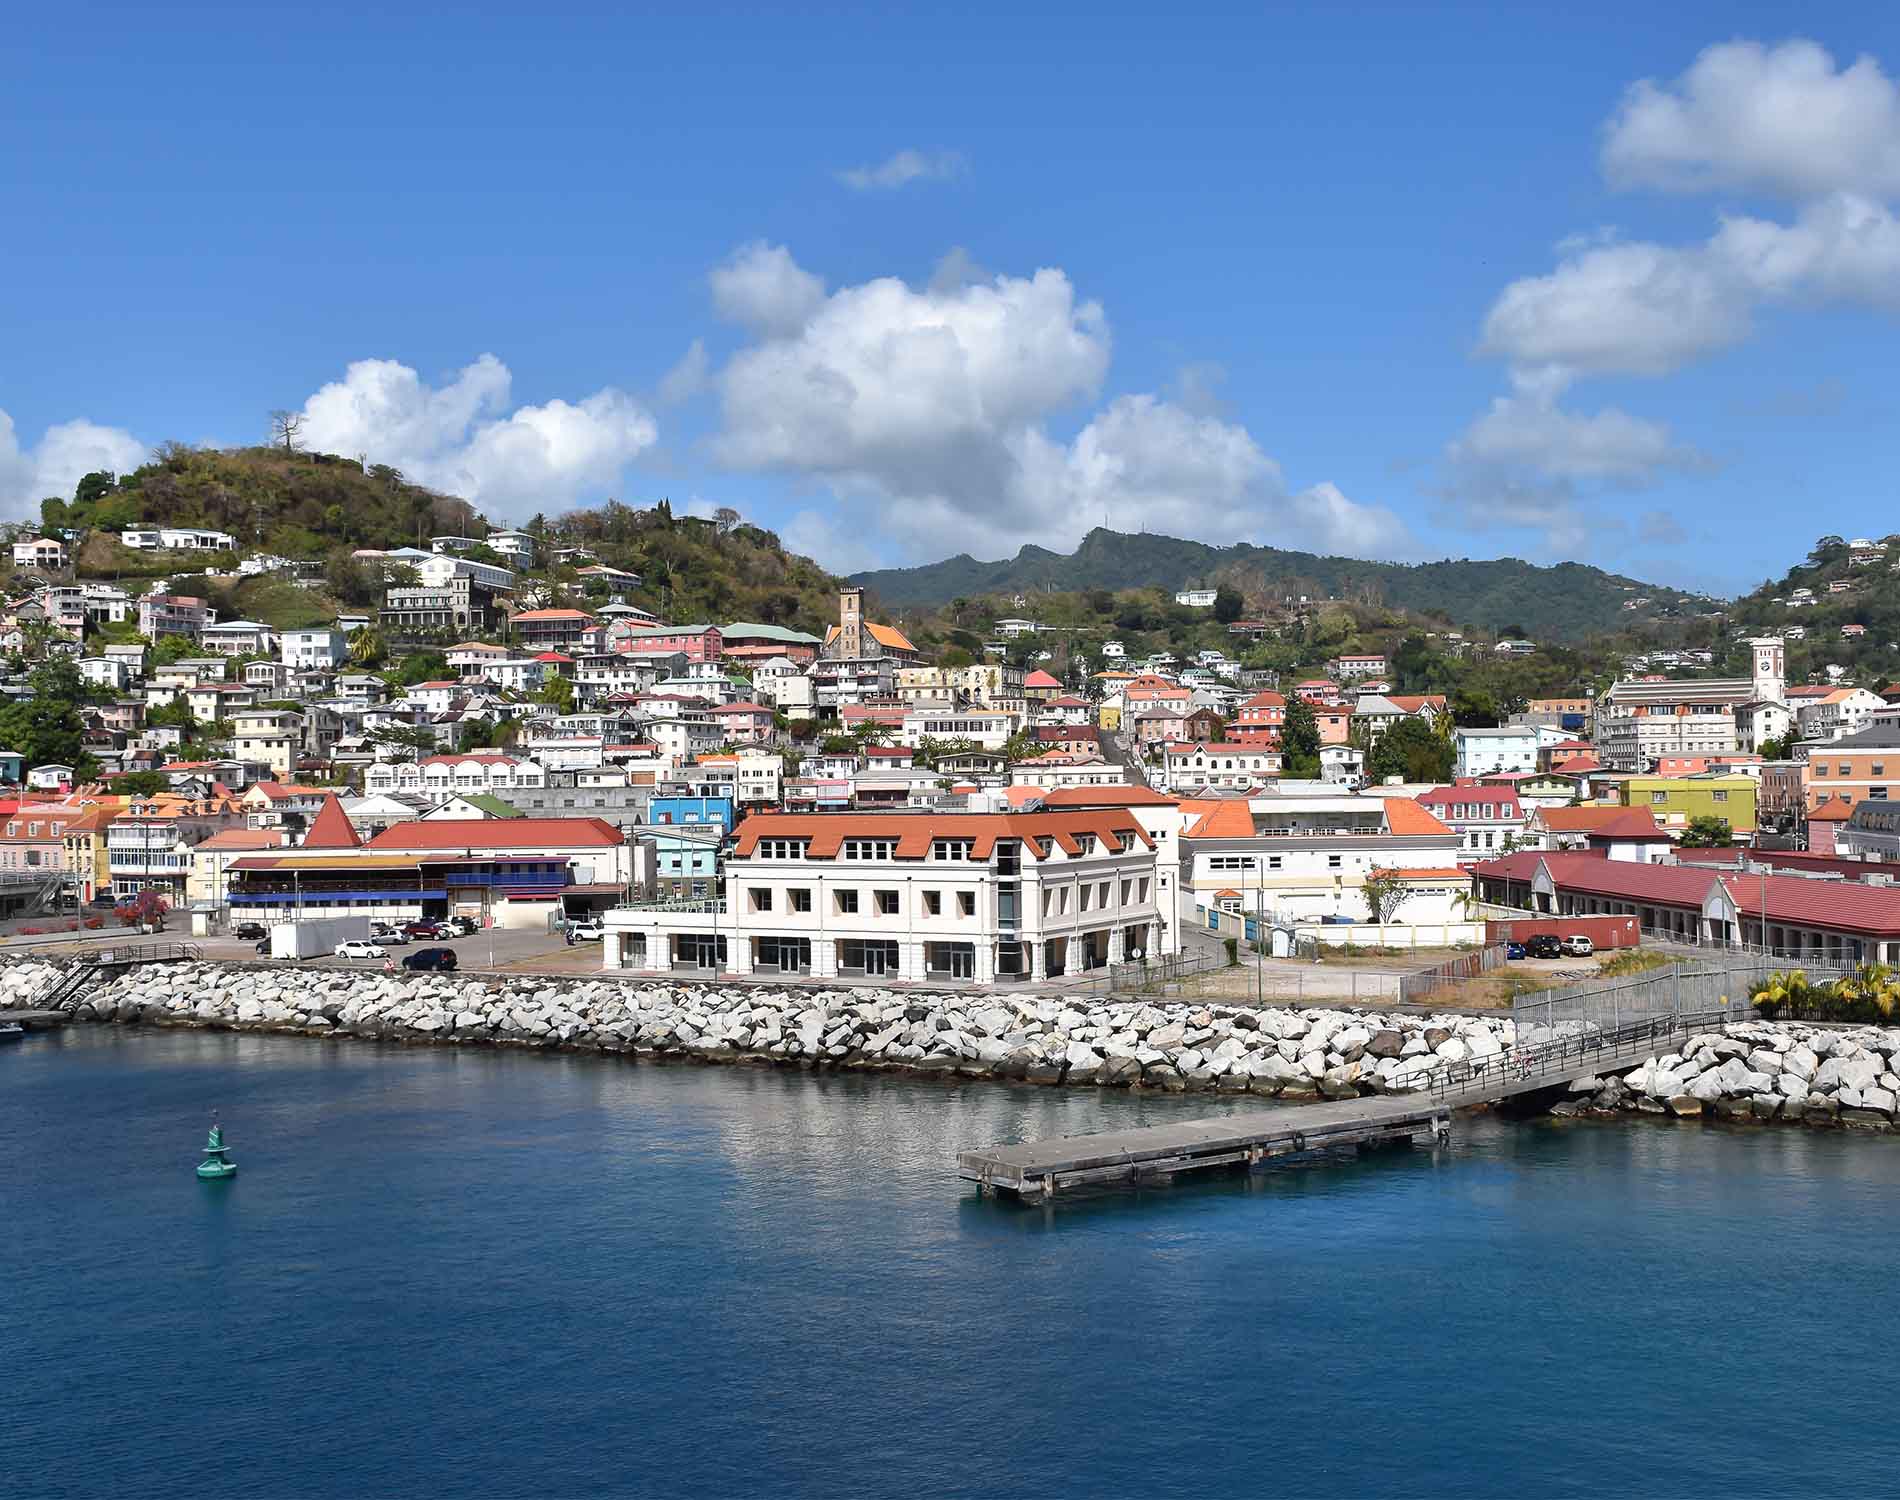 /-/media/images/website/background-images/offices/grenadines/grenadines_background_01.ashx?sc_lang=fr-ca